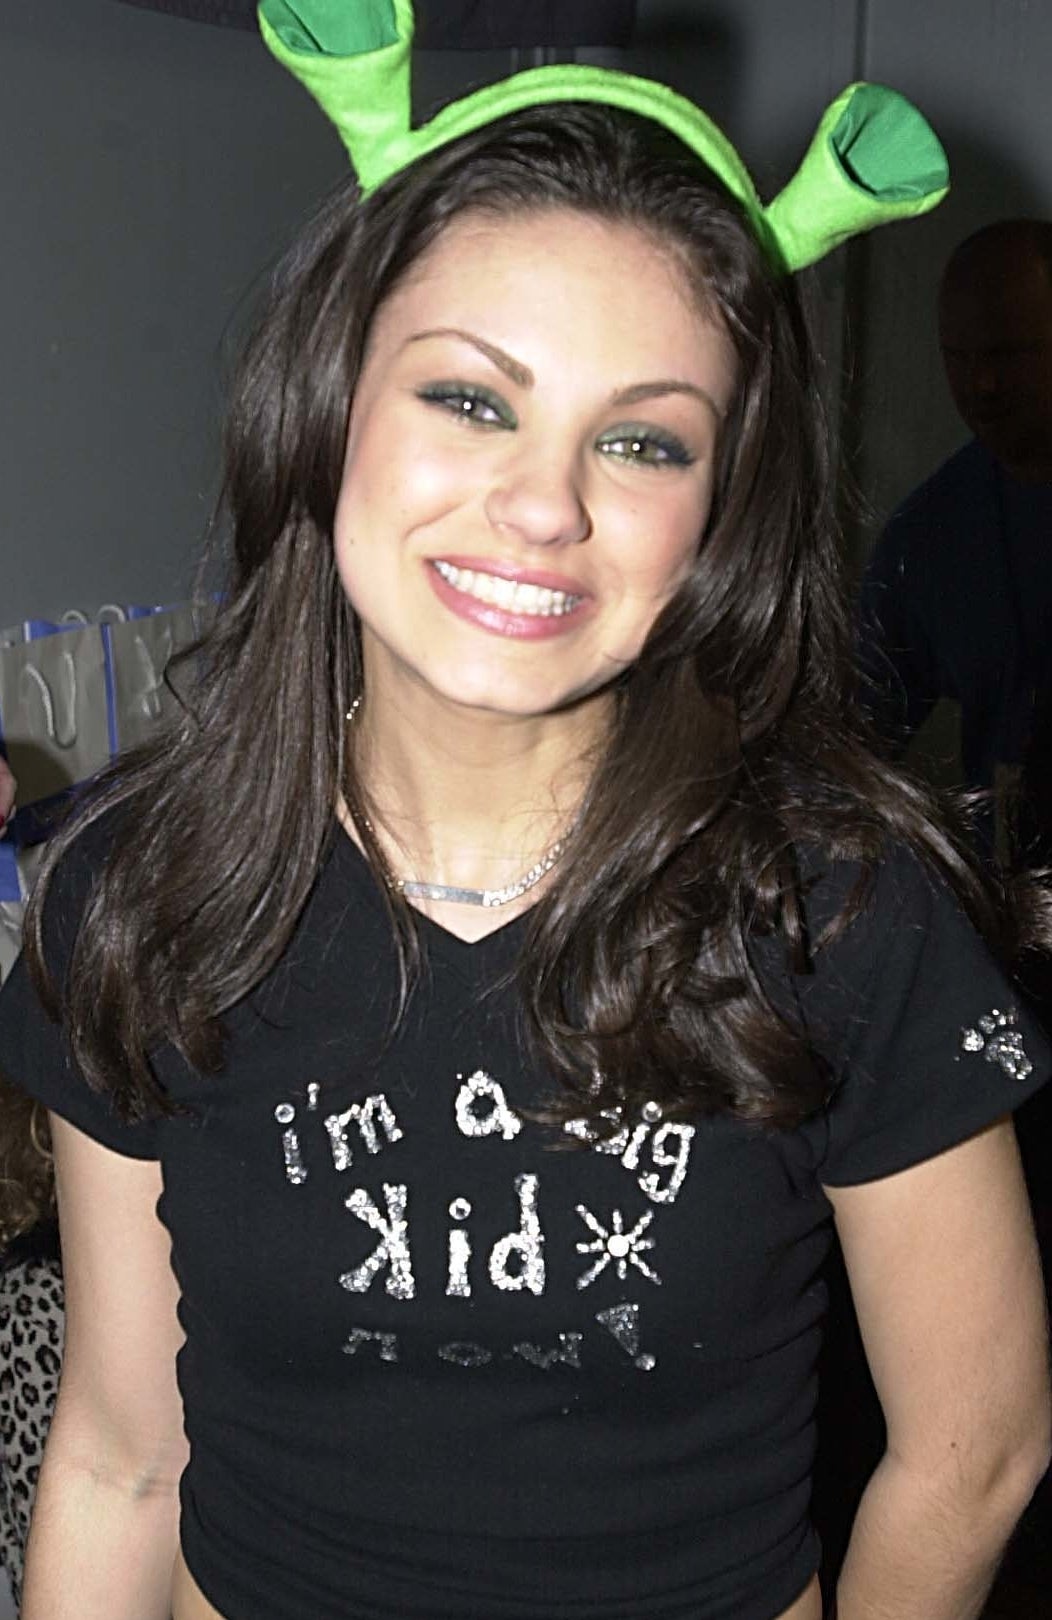 Close-up of Mila smiling and wearing a &quot;I&#x27;m a big kid&quot; T-shirt